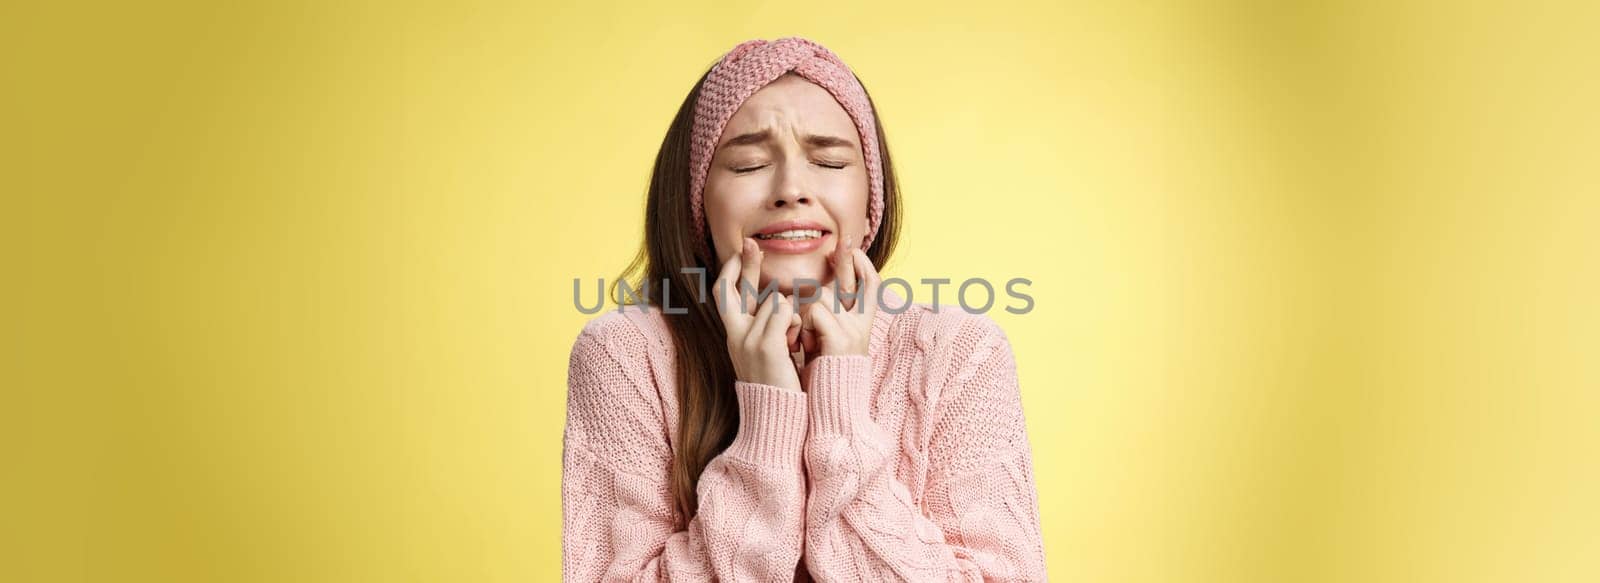 Worried, nervous tensed young cute girl in pink glamour headband, sweater, crossing fingers for good luck, clenching teeth, close eyes, anticipating miracle, having desire, wanting dream come true.